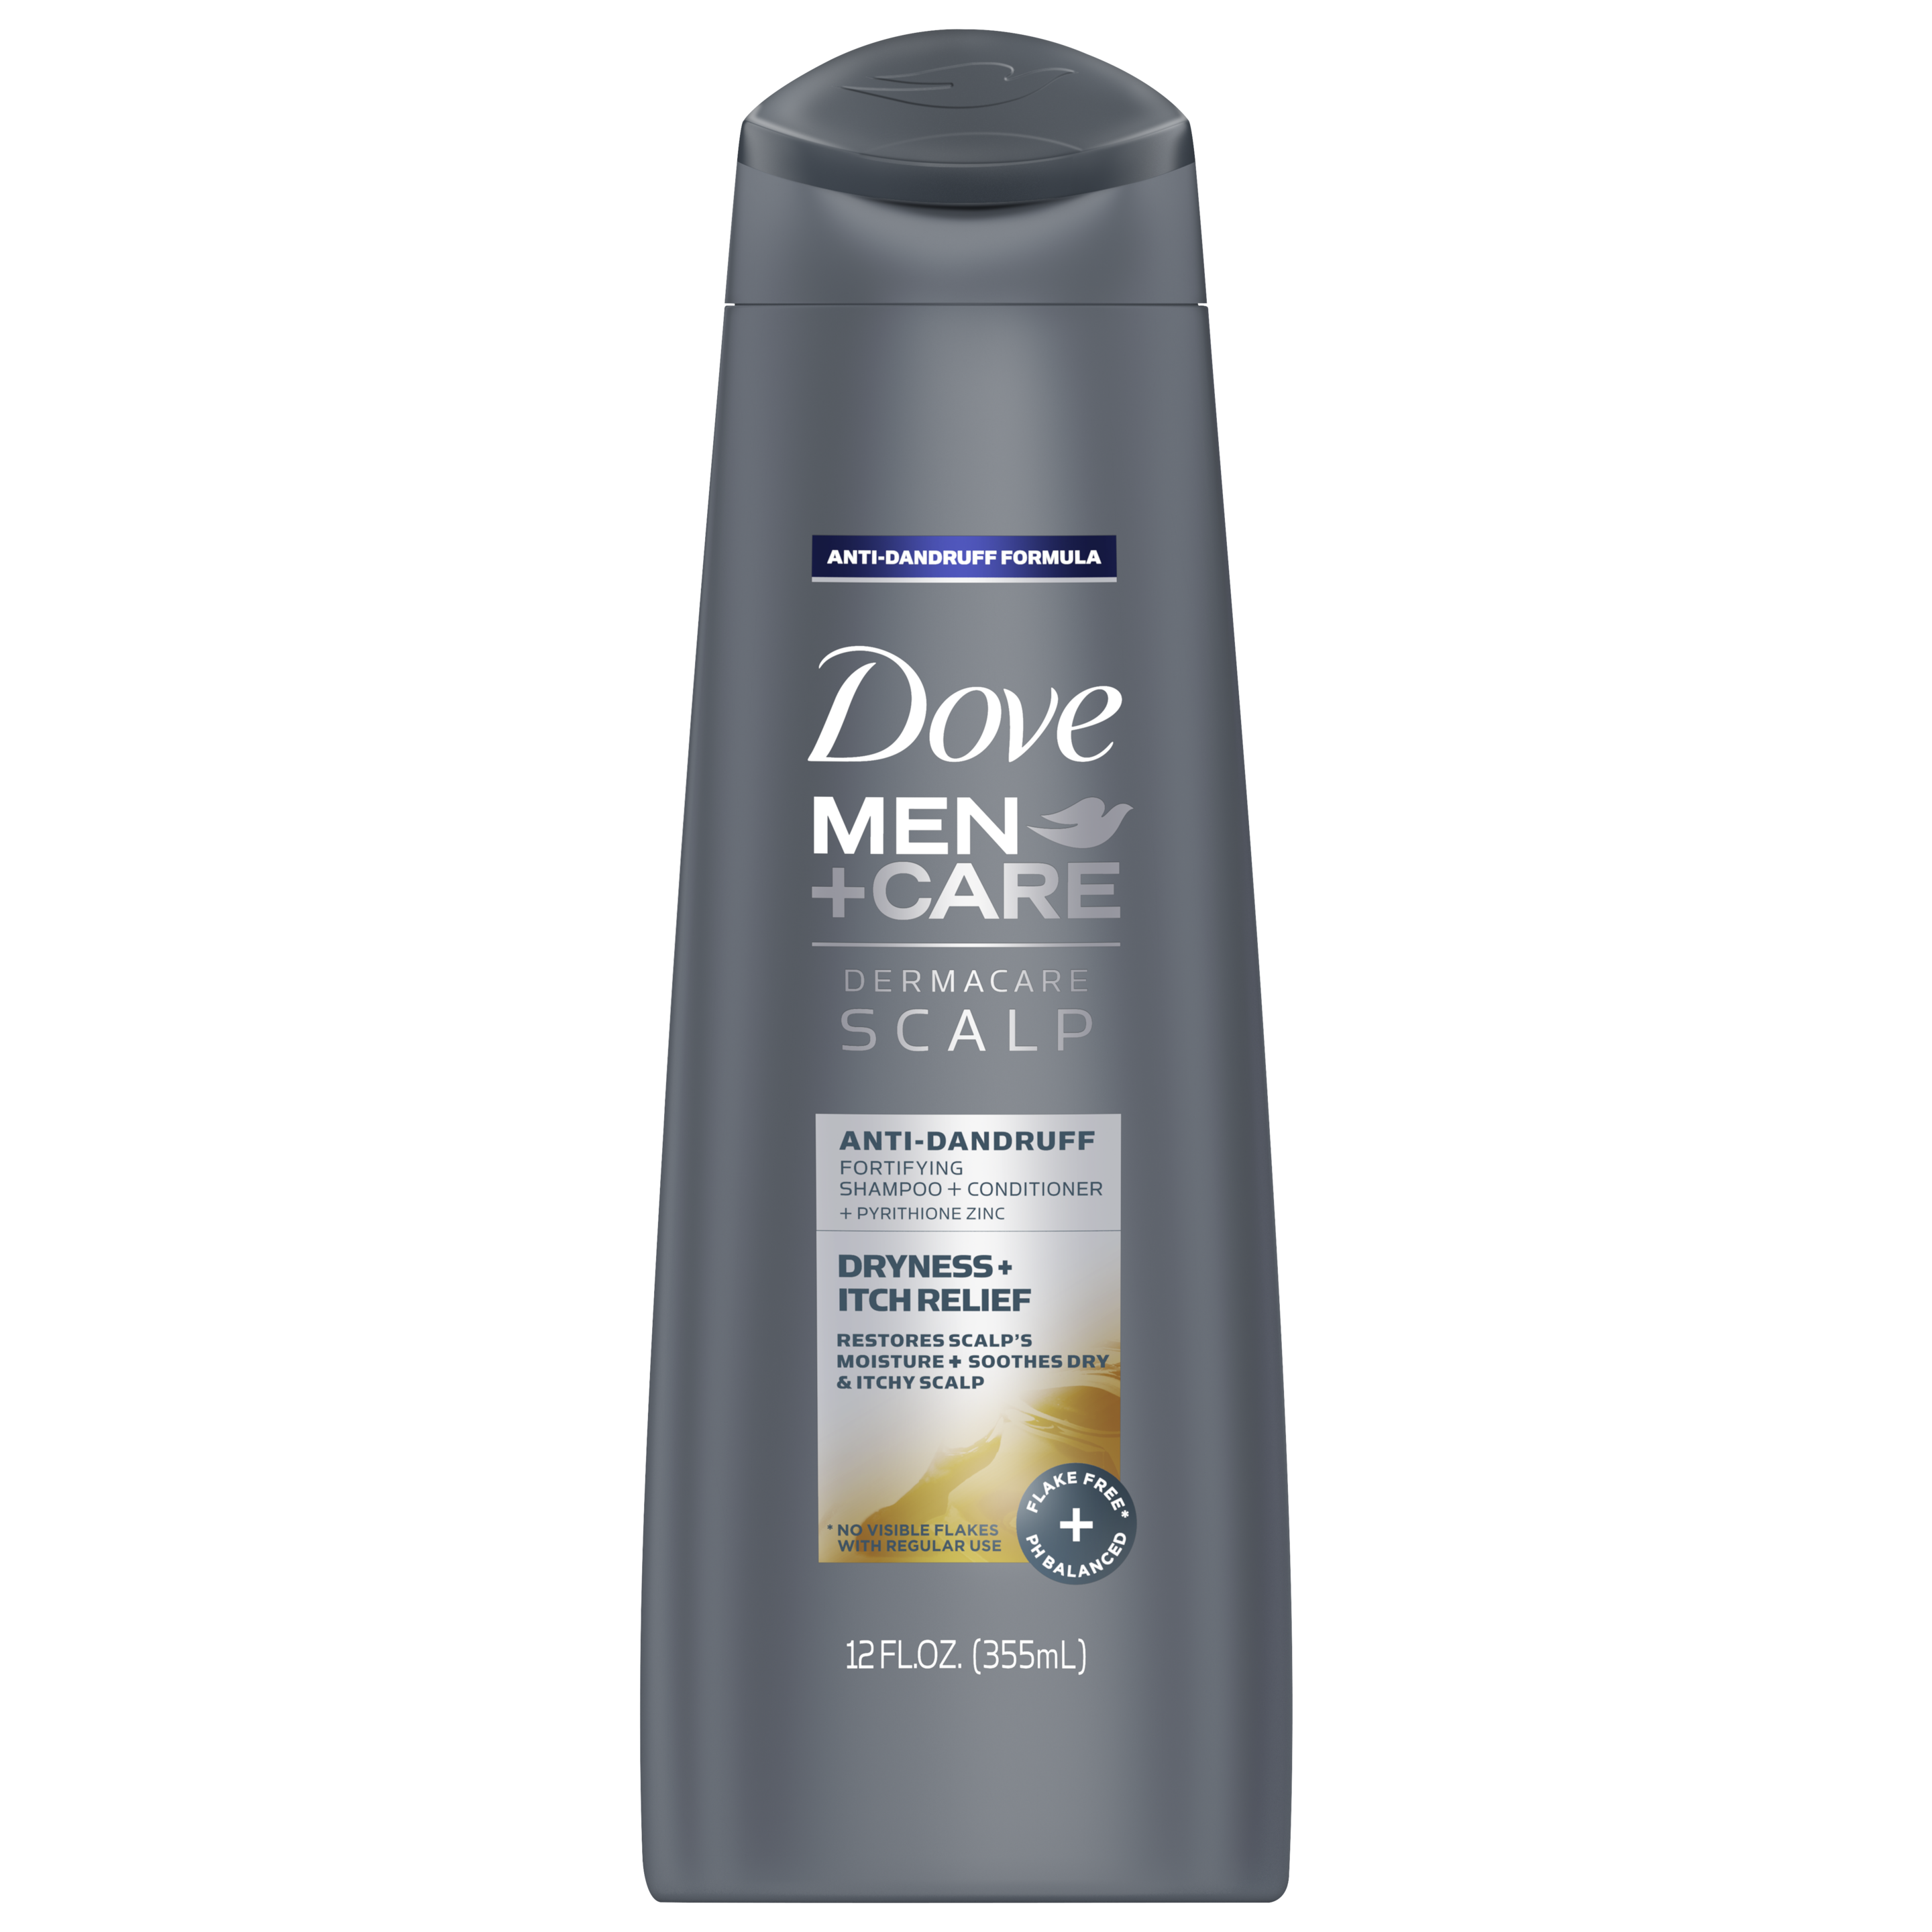 Dove Men+Care Dermacare Scalp Dryness + Itch Relief